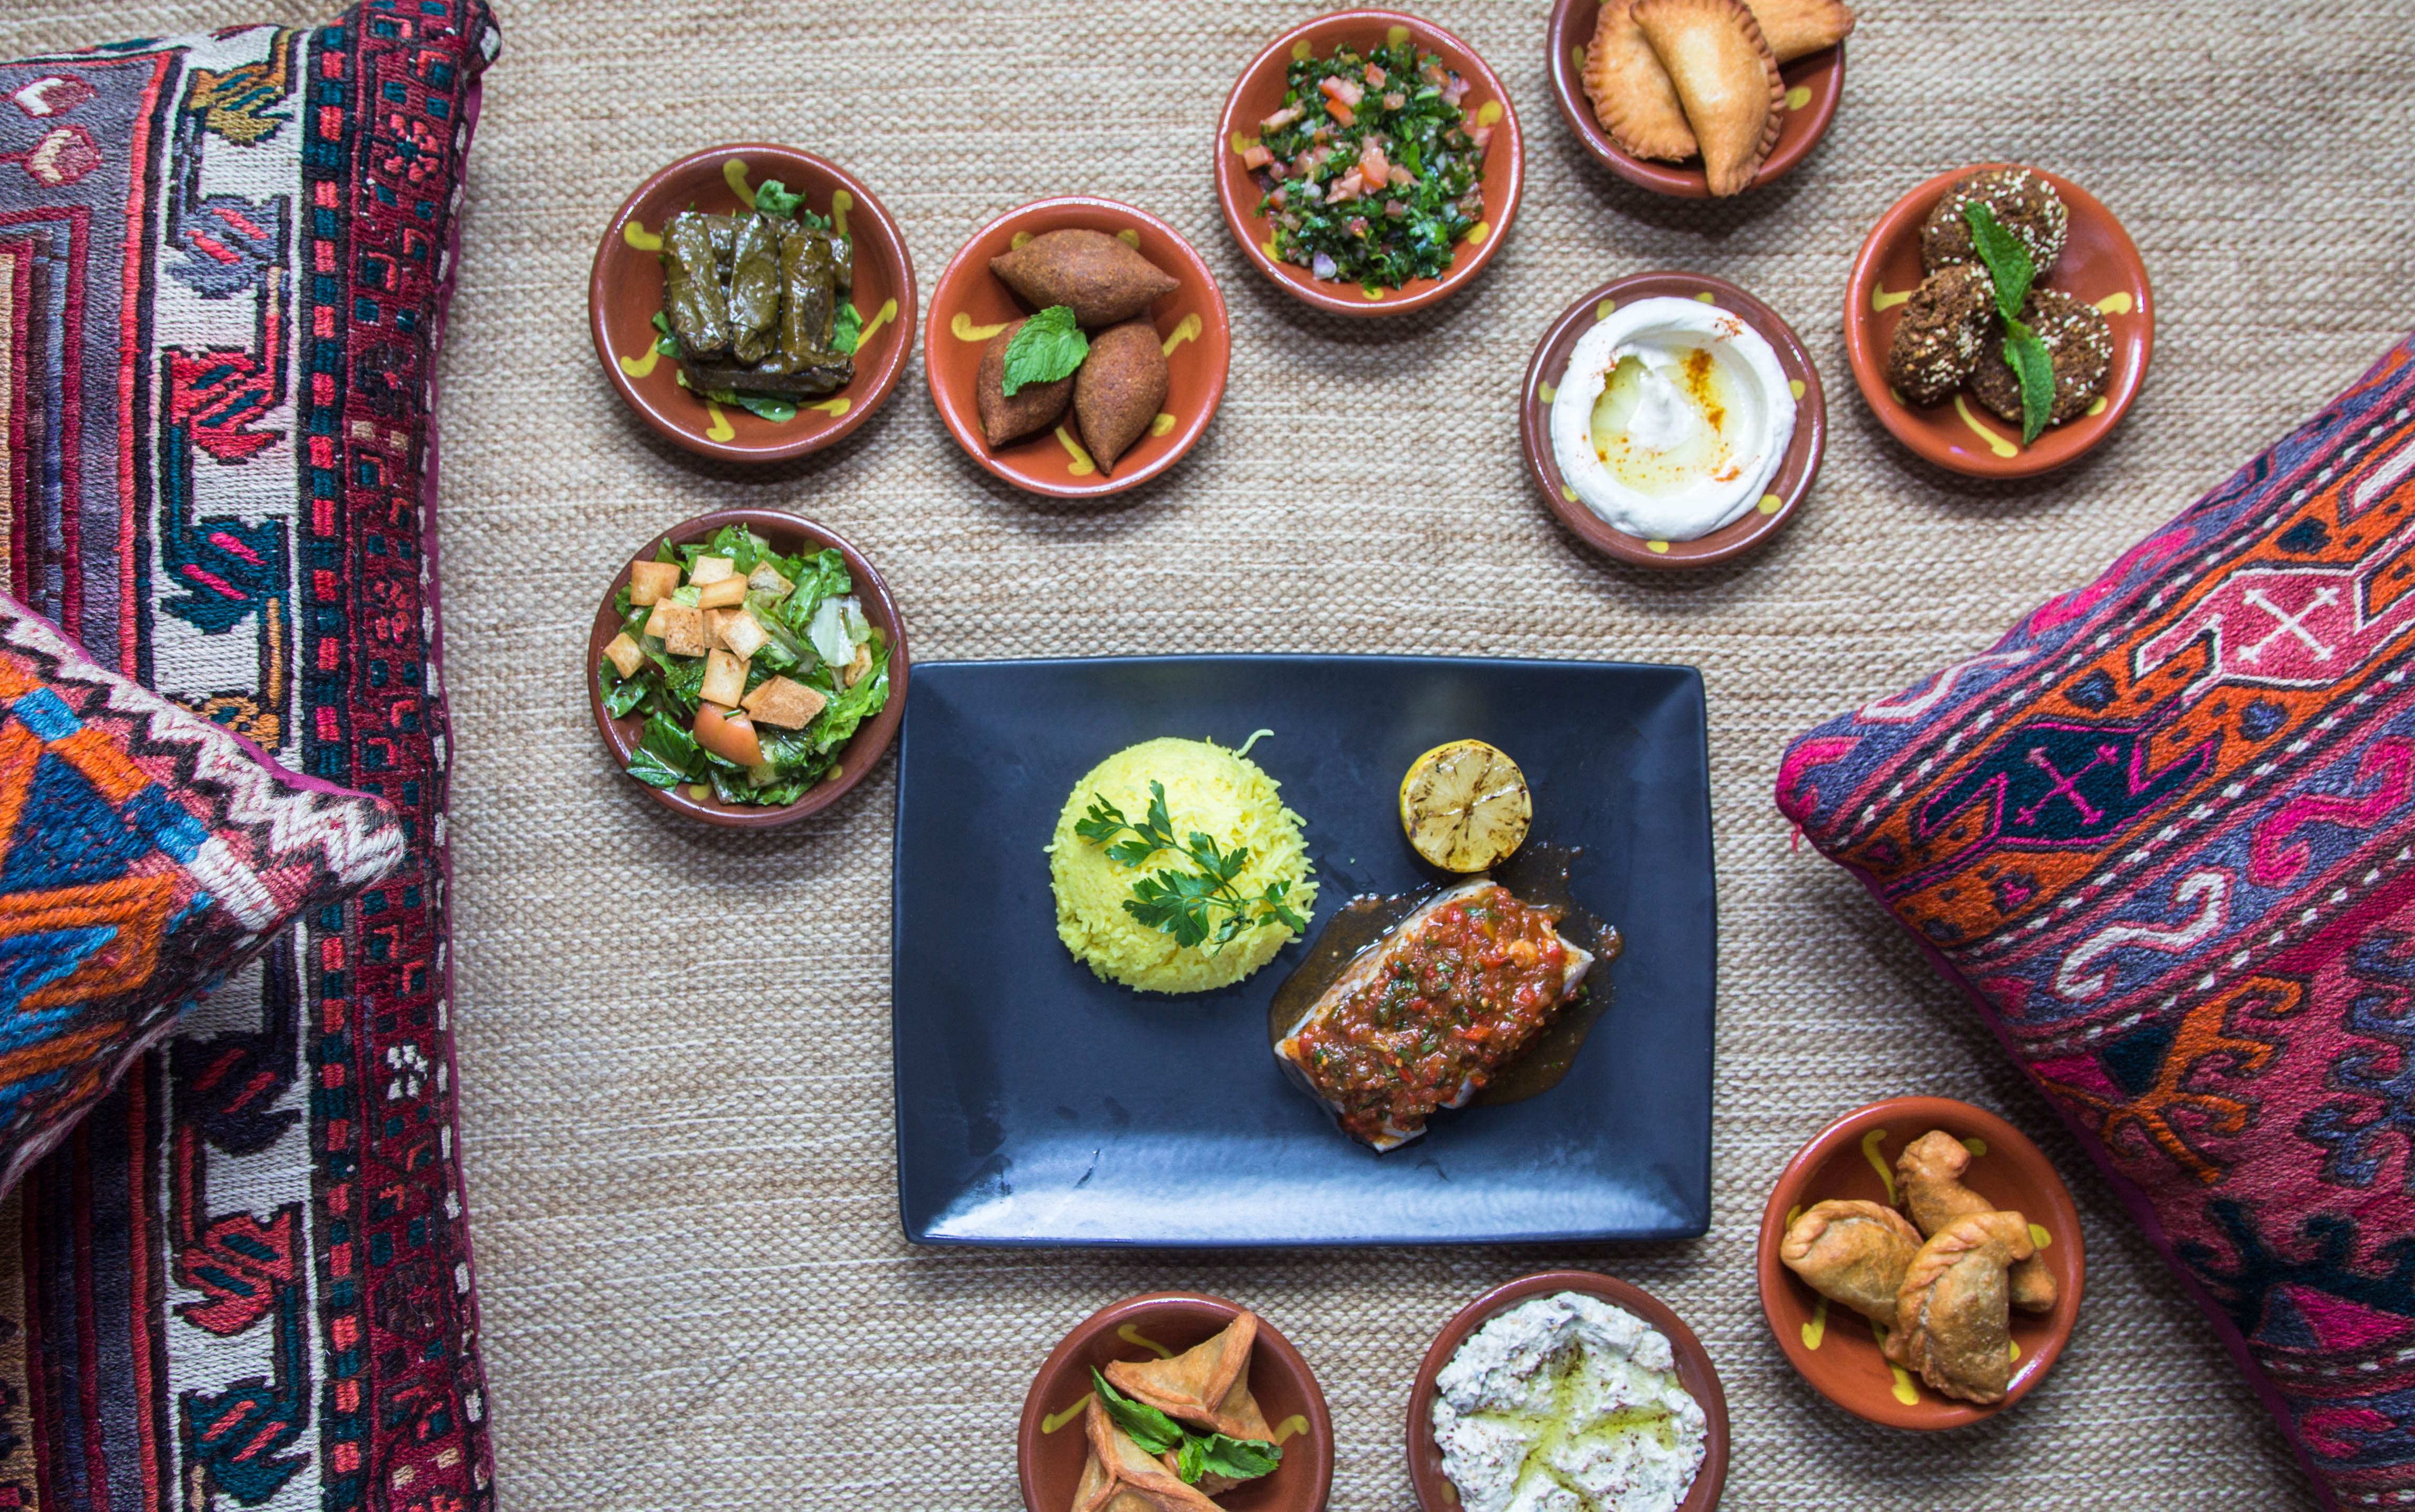 Iftar in a Bedouin style at Chedi Oman